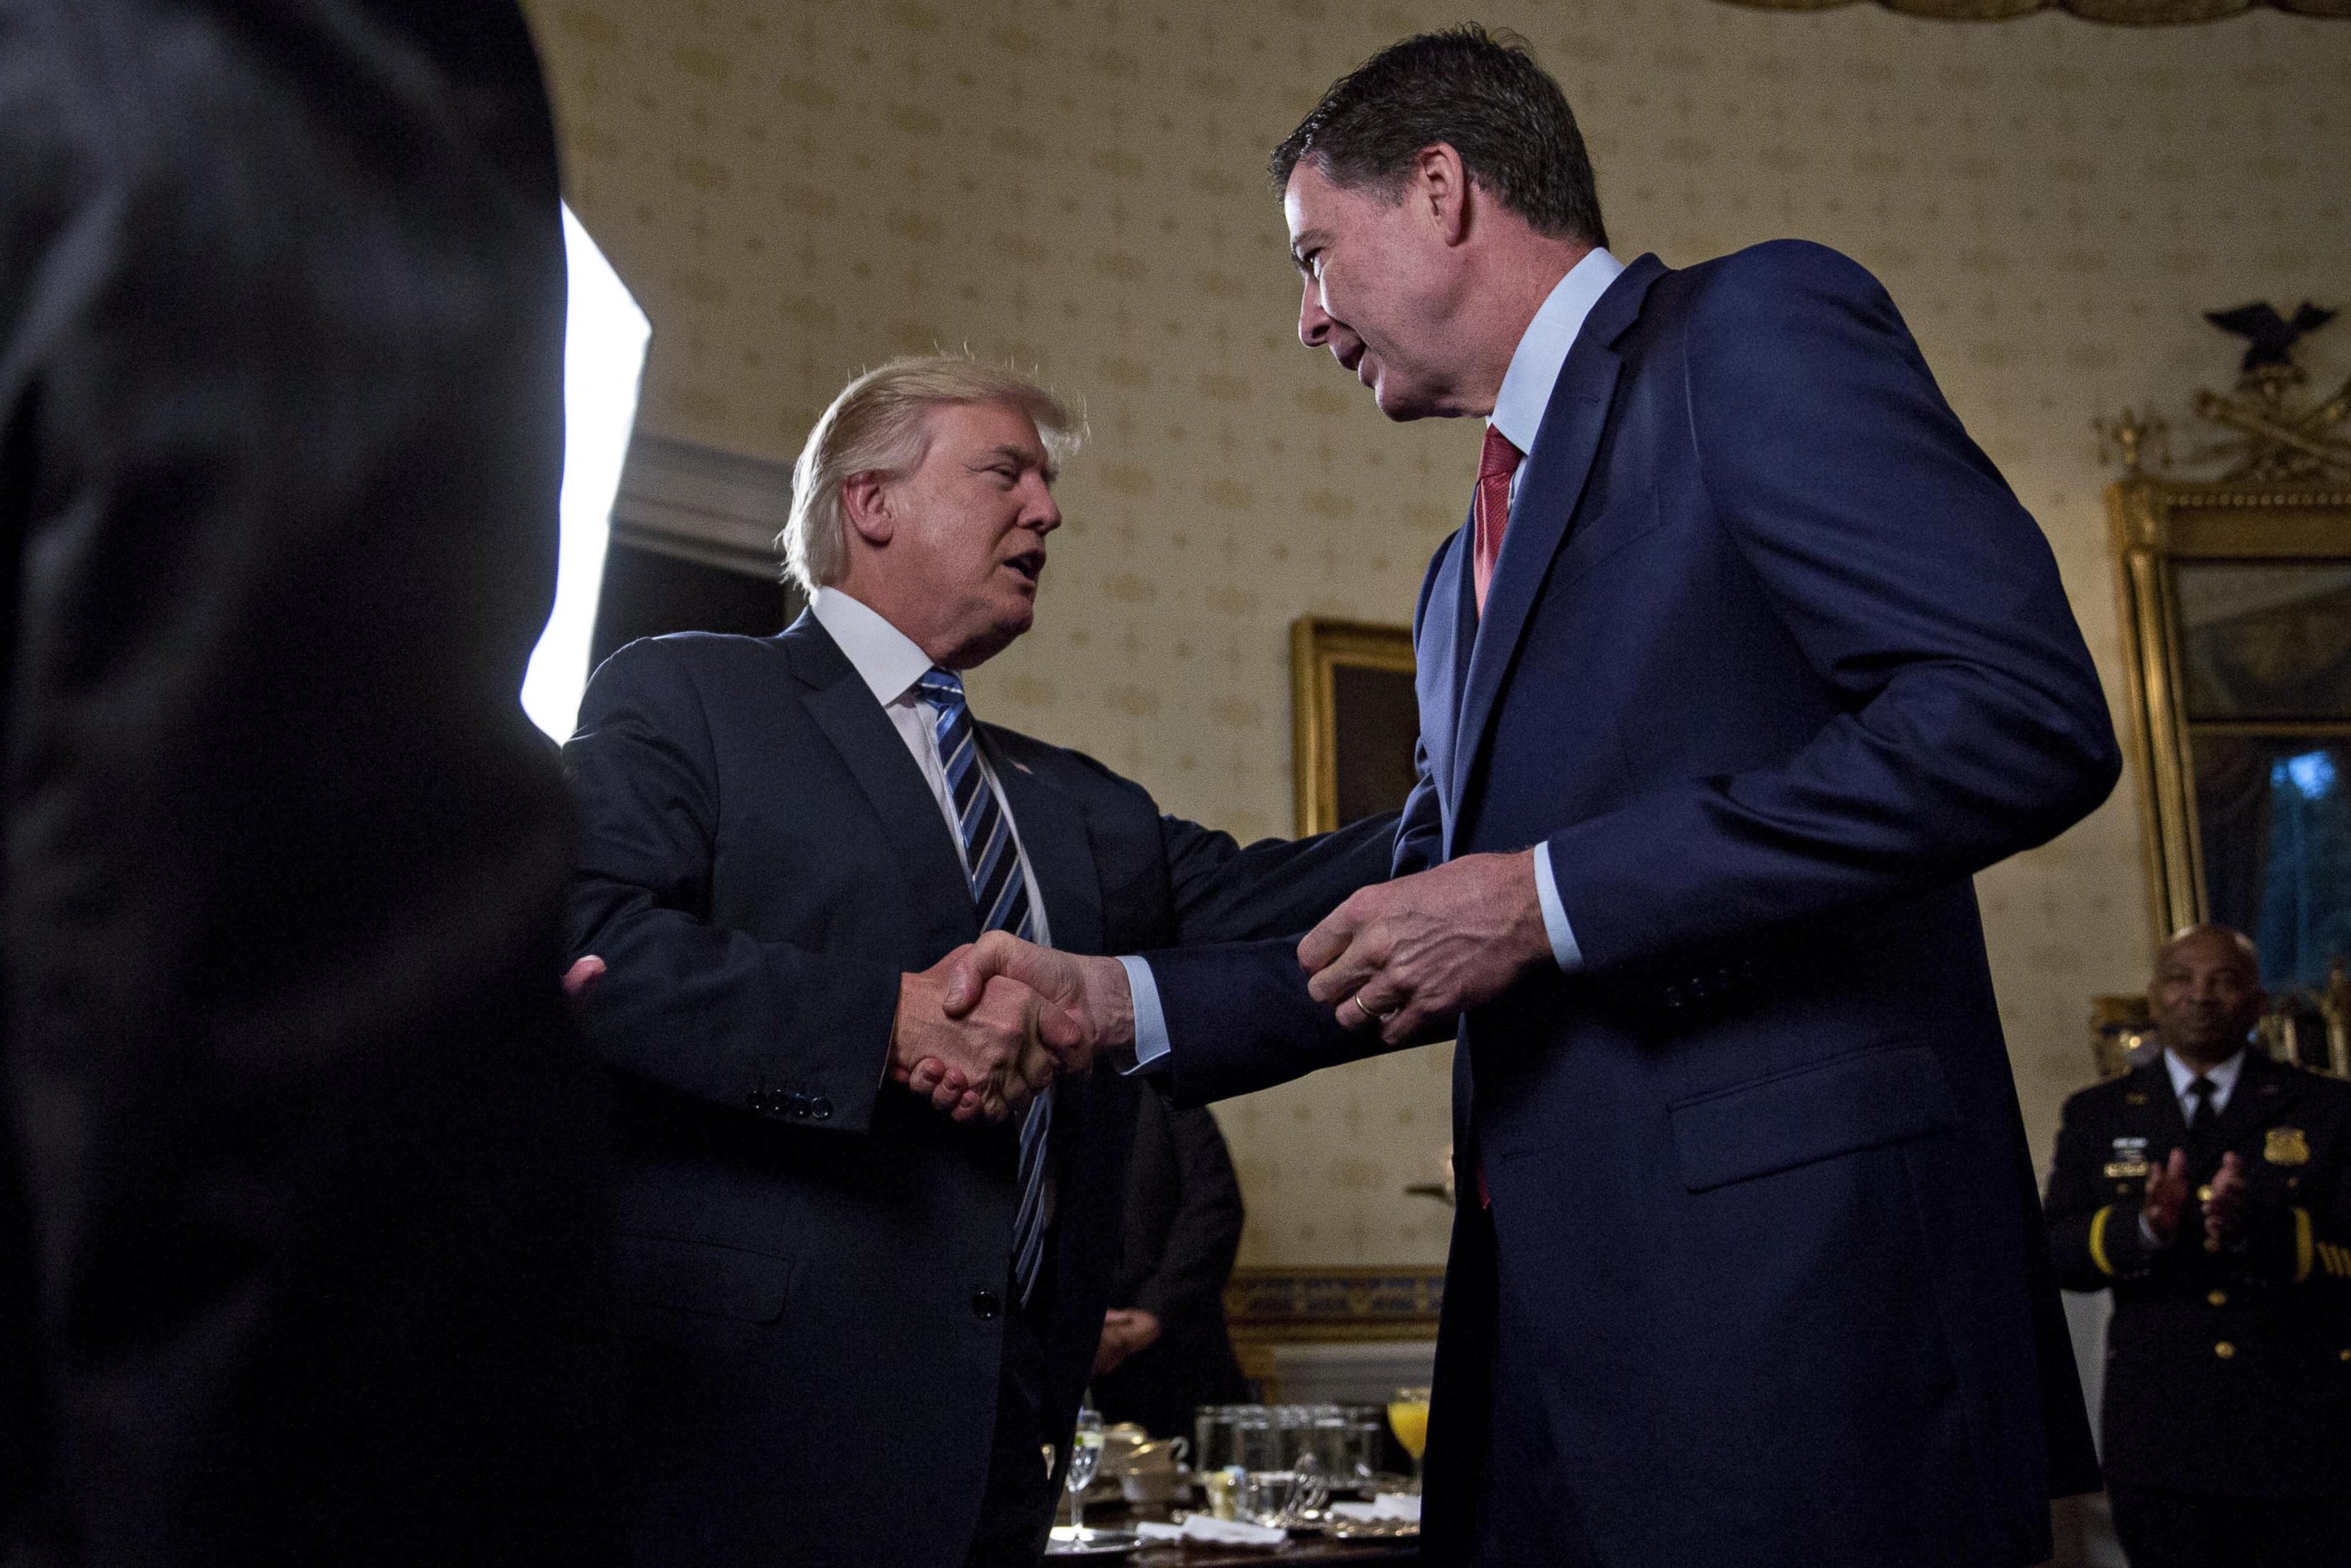 PHOTO: President Donald Trump shakes hands with James Comey, director of the FBI, during areception in the Blue Room of the White House in Washington, D.C., Jan. 22, 2017.